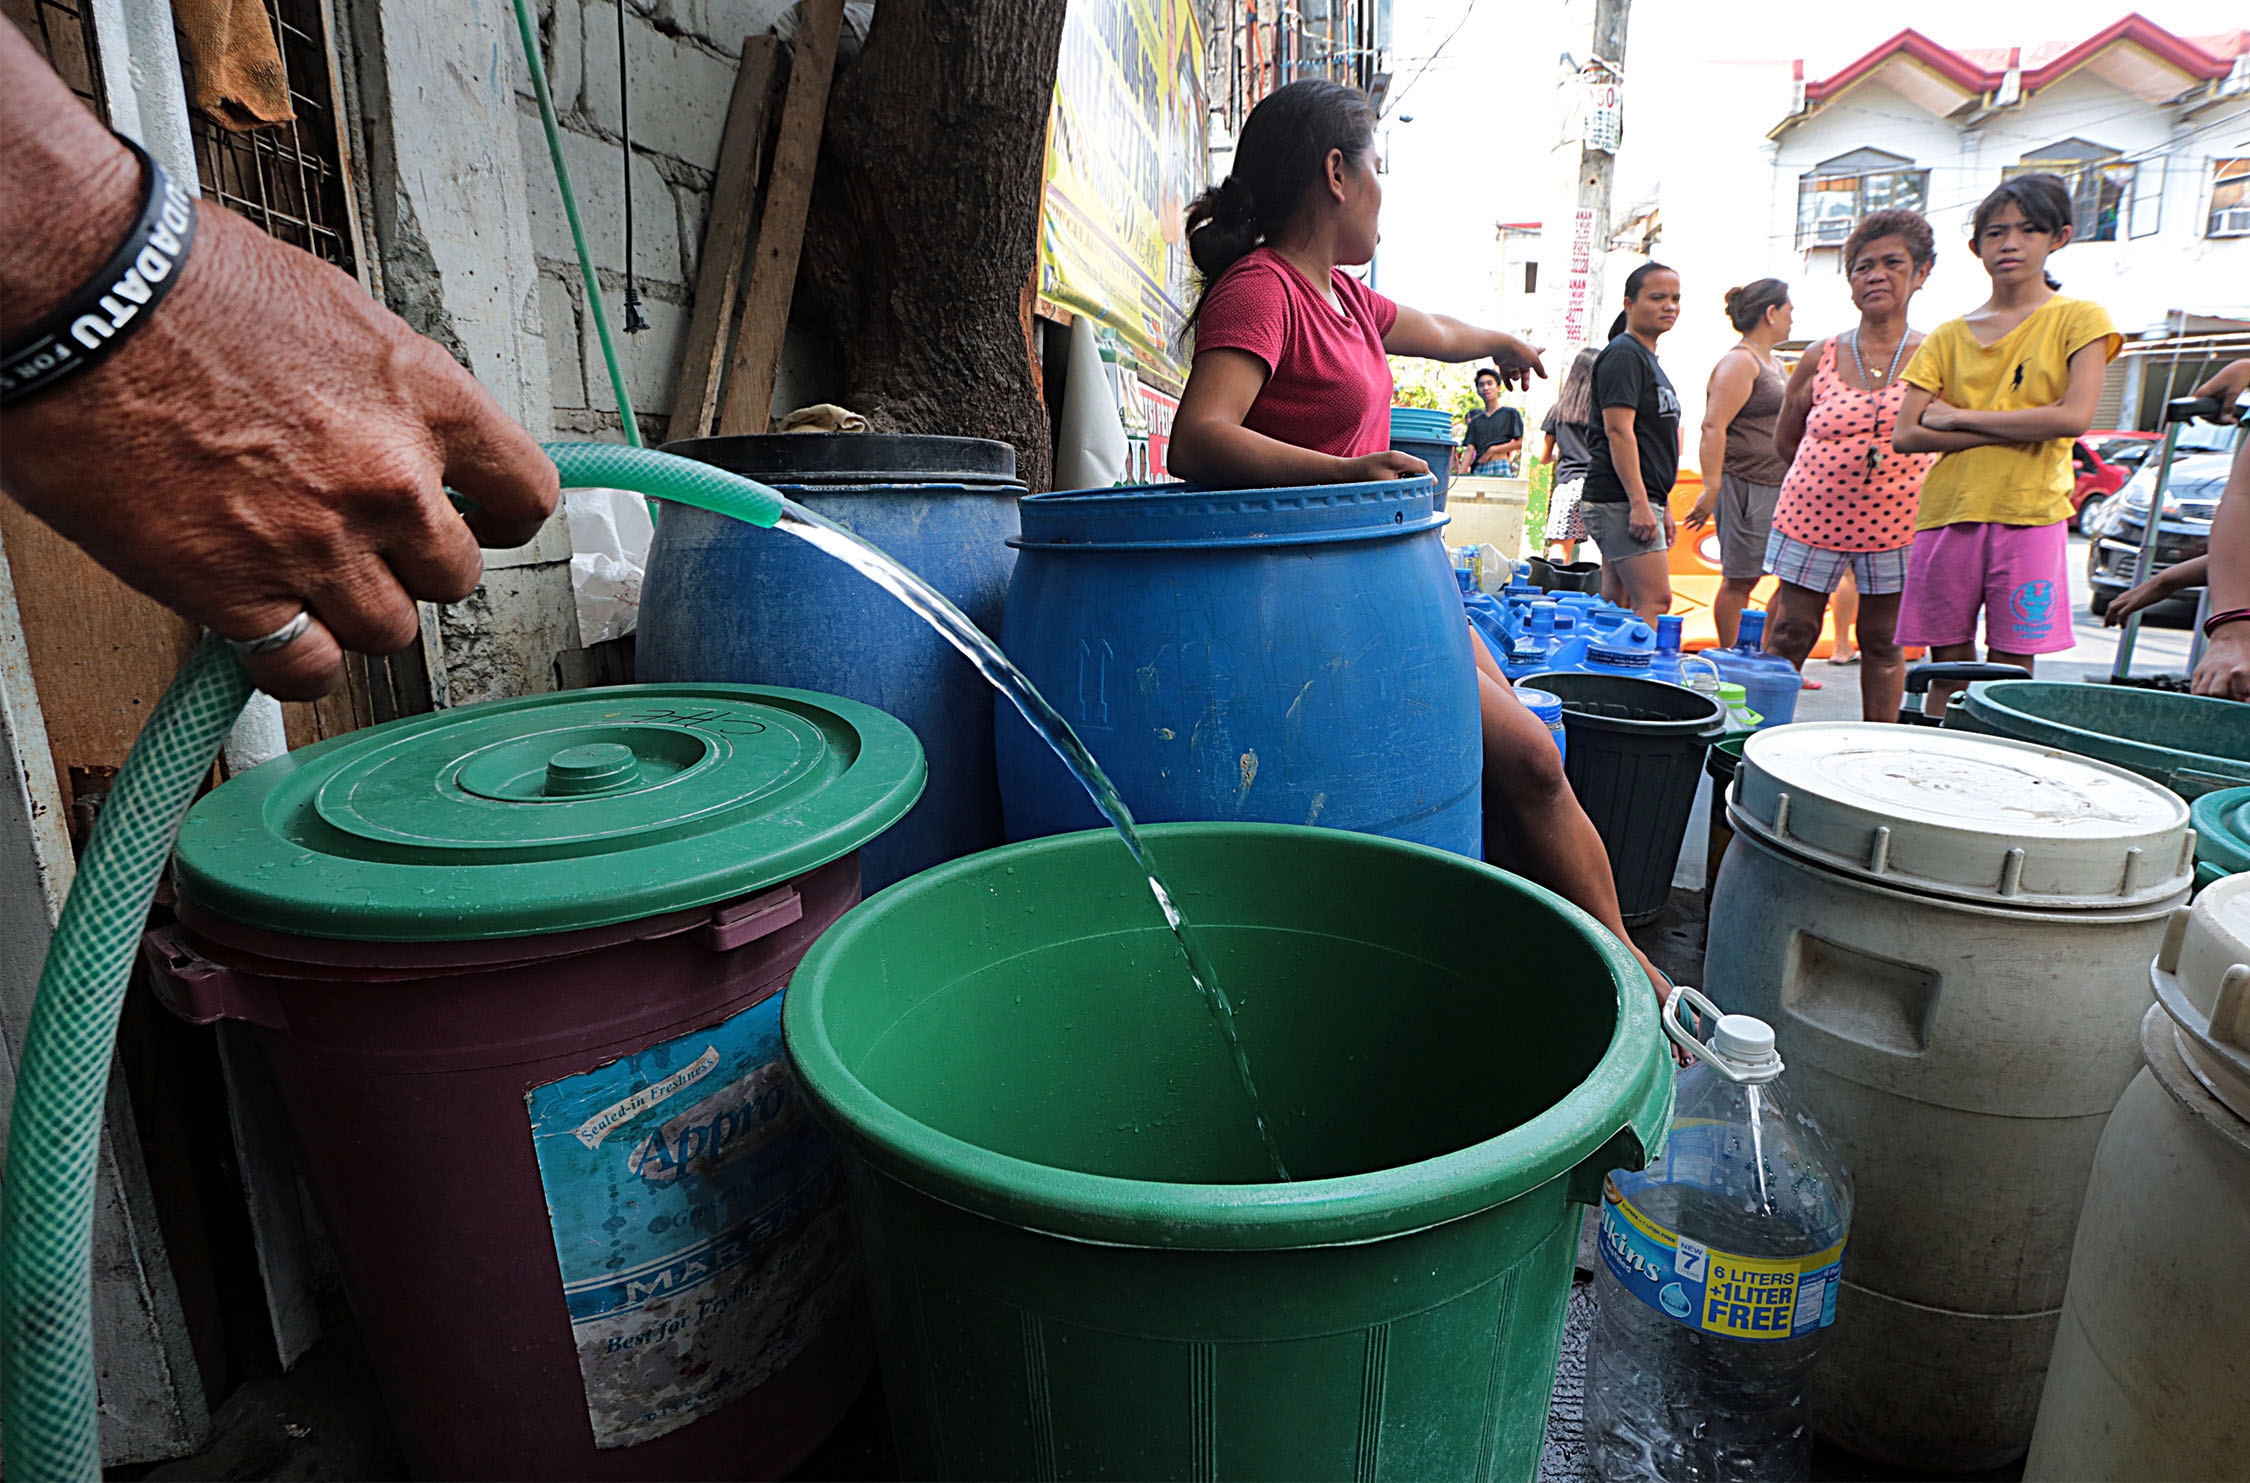 Stiffer fines sought for firms over Metro Manila water shortage